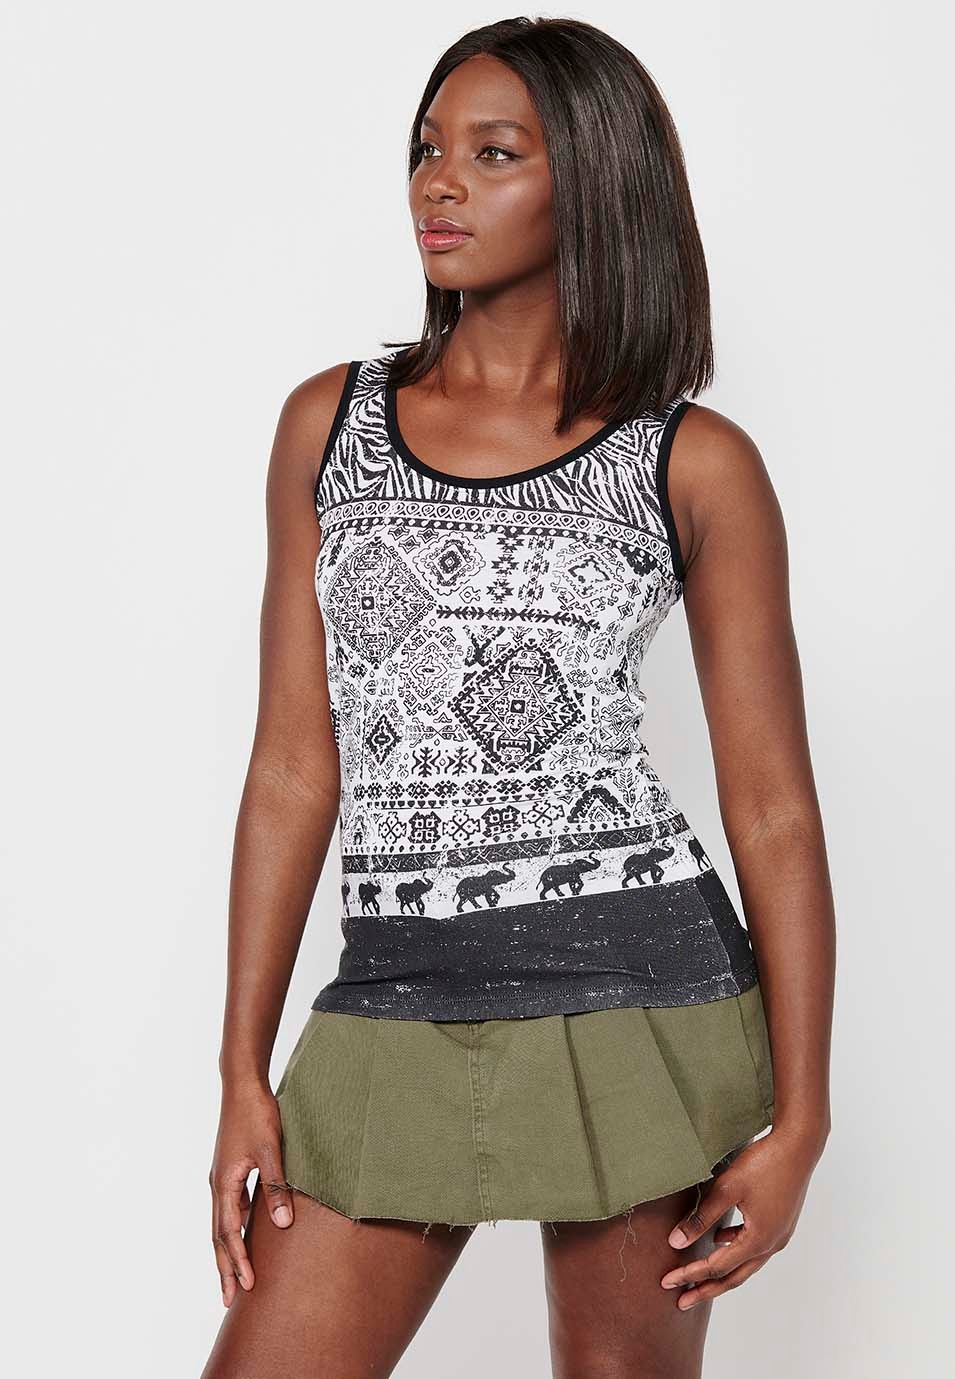 Women's White Color Front Print Round Neck Sleeveless T-shirt 4